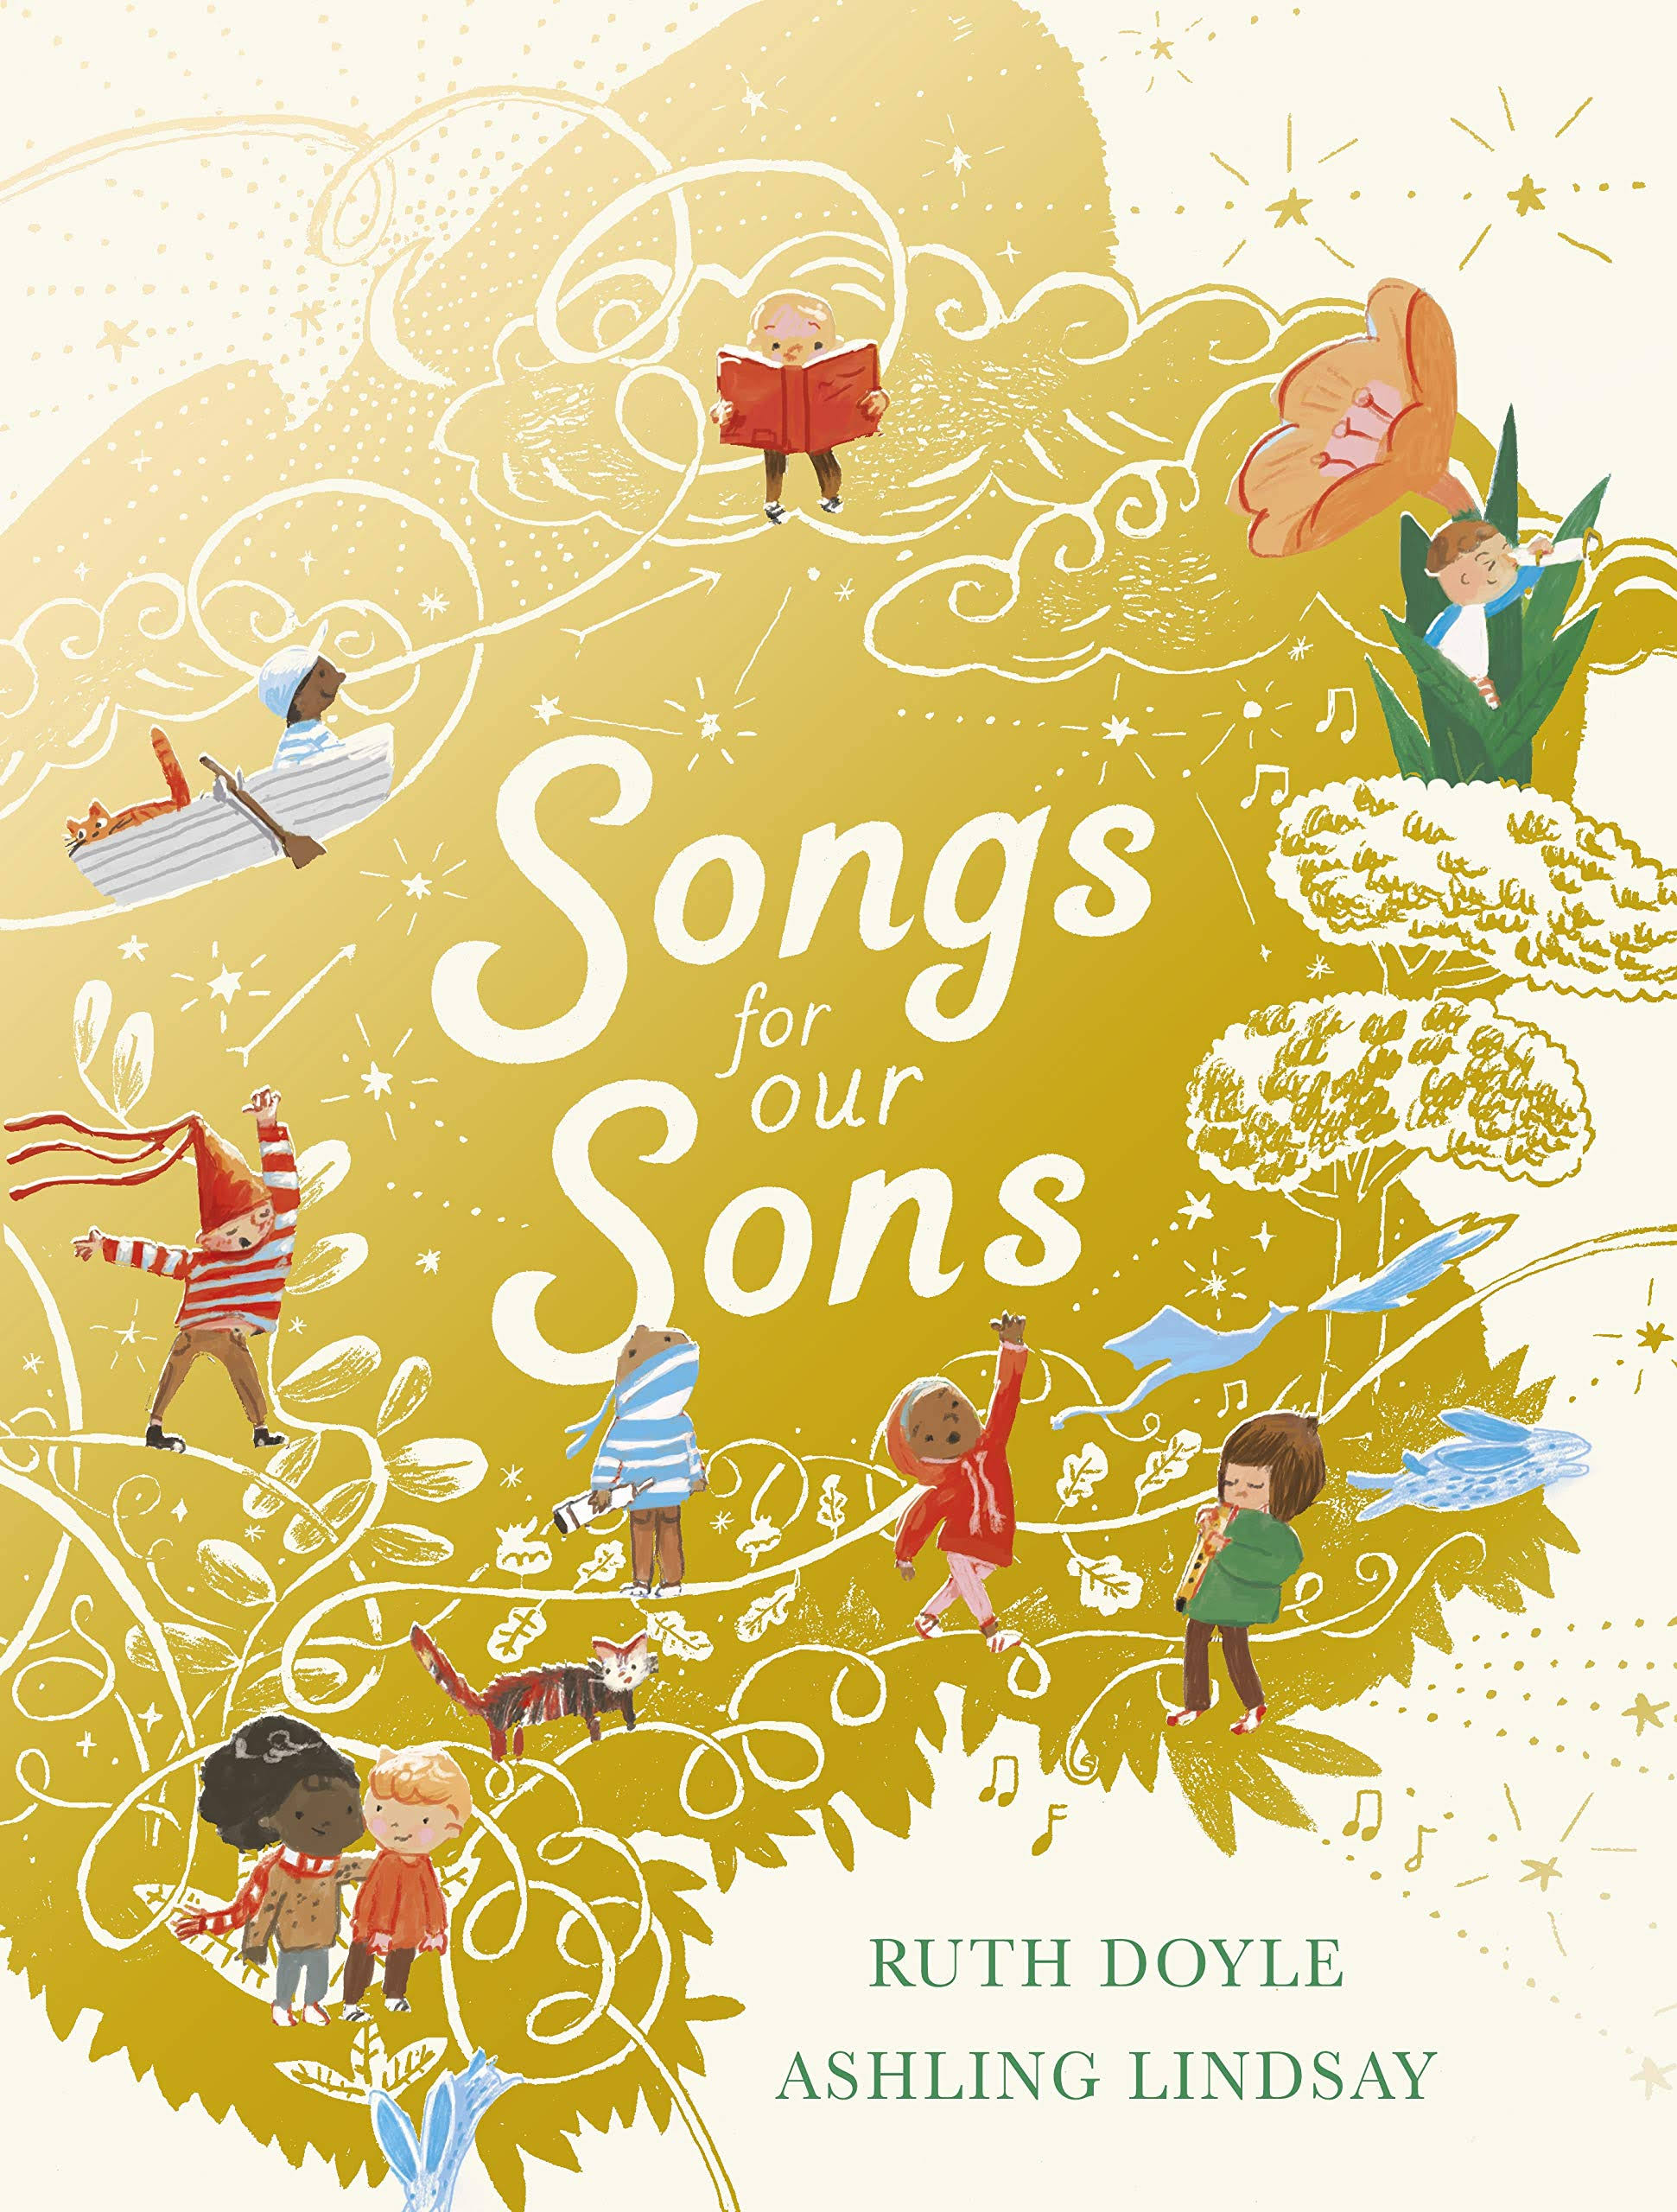 Songs for Our Sons by Ruth Doyle